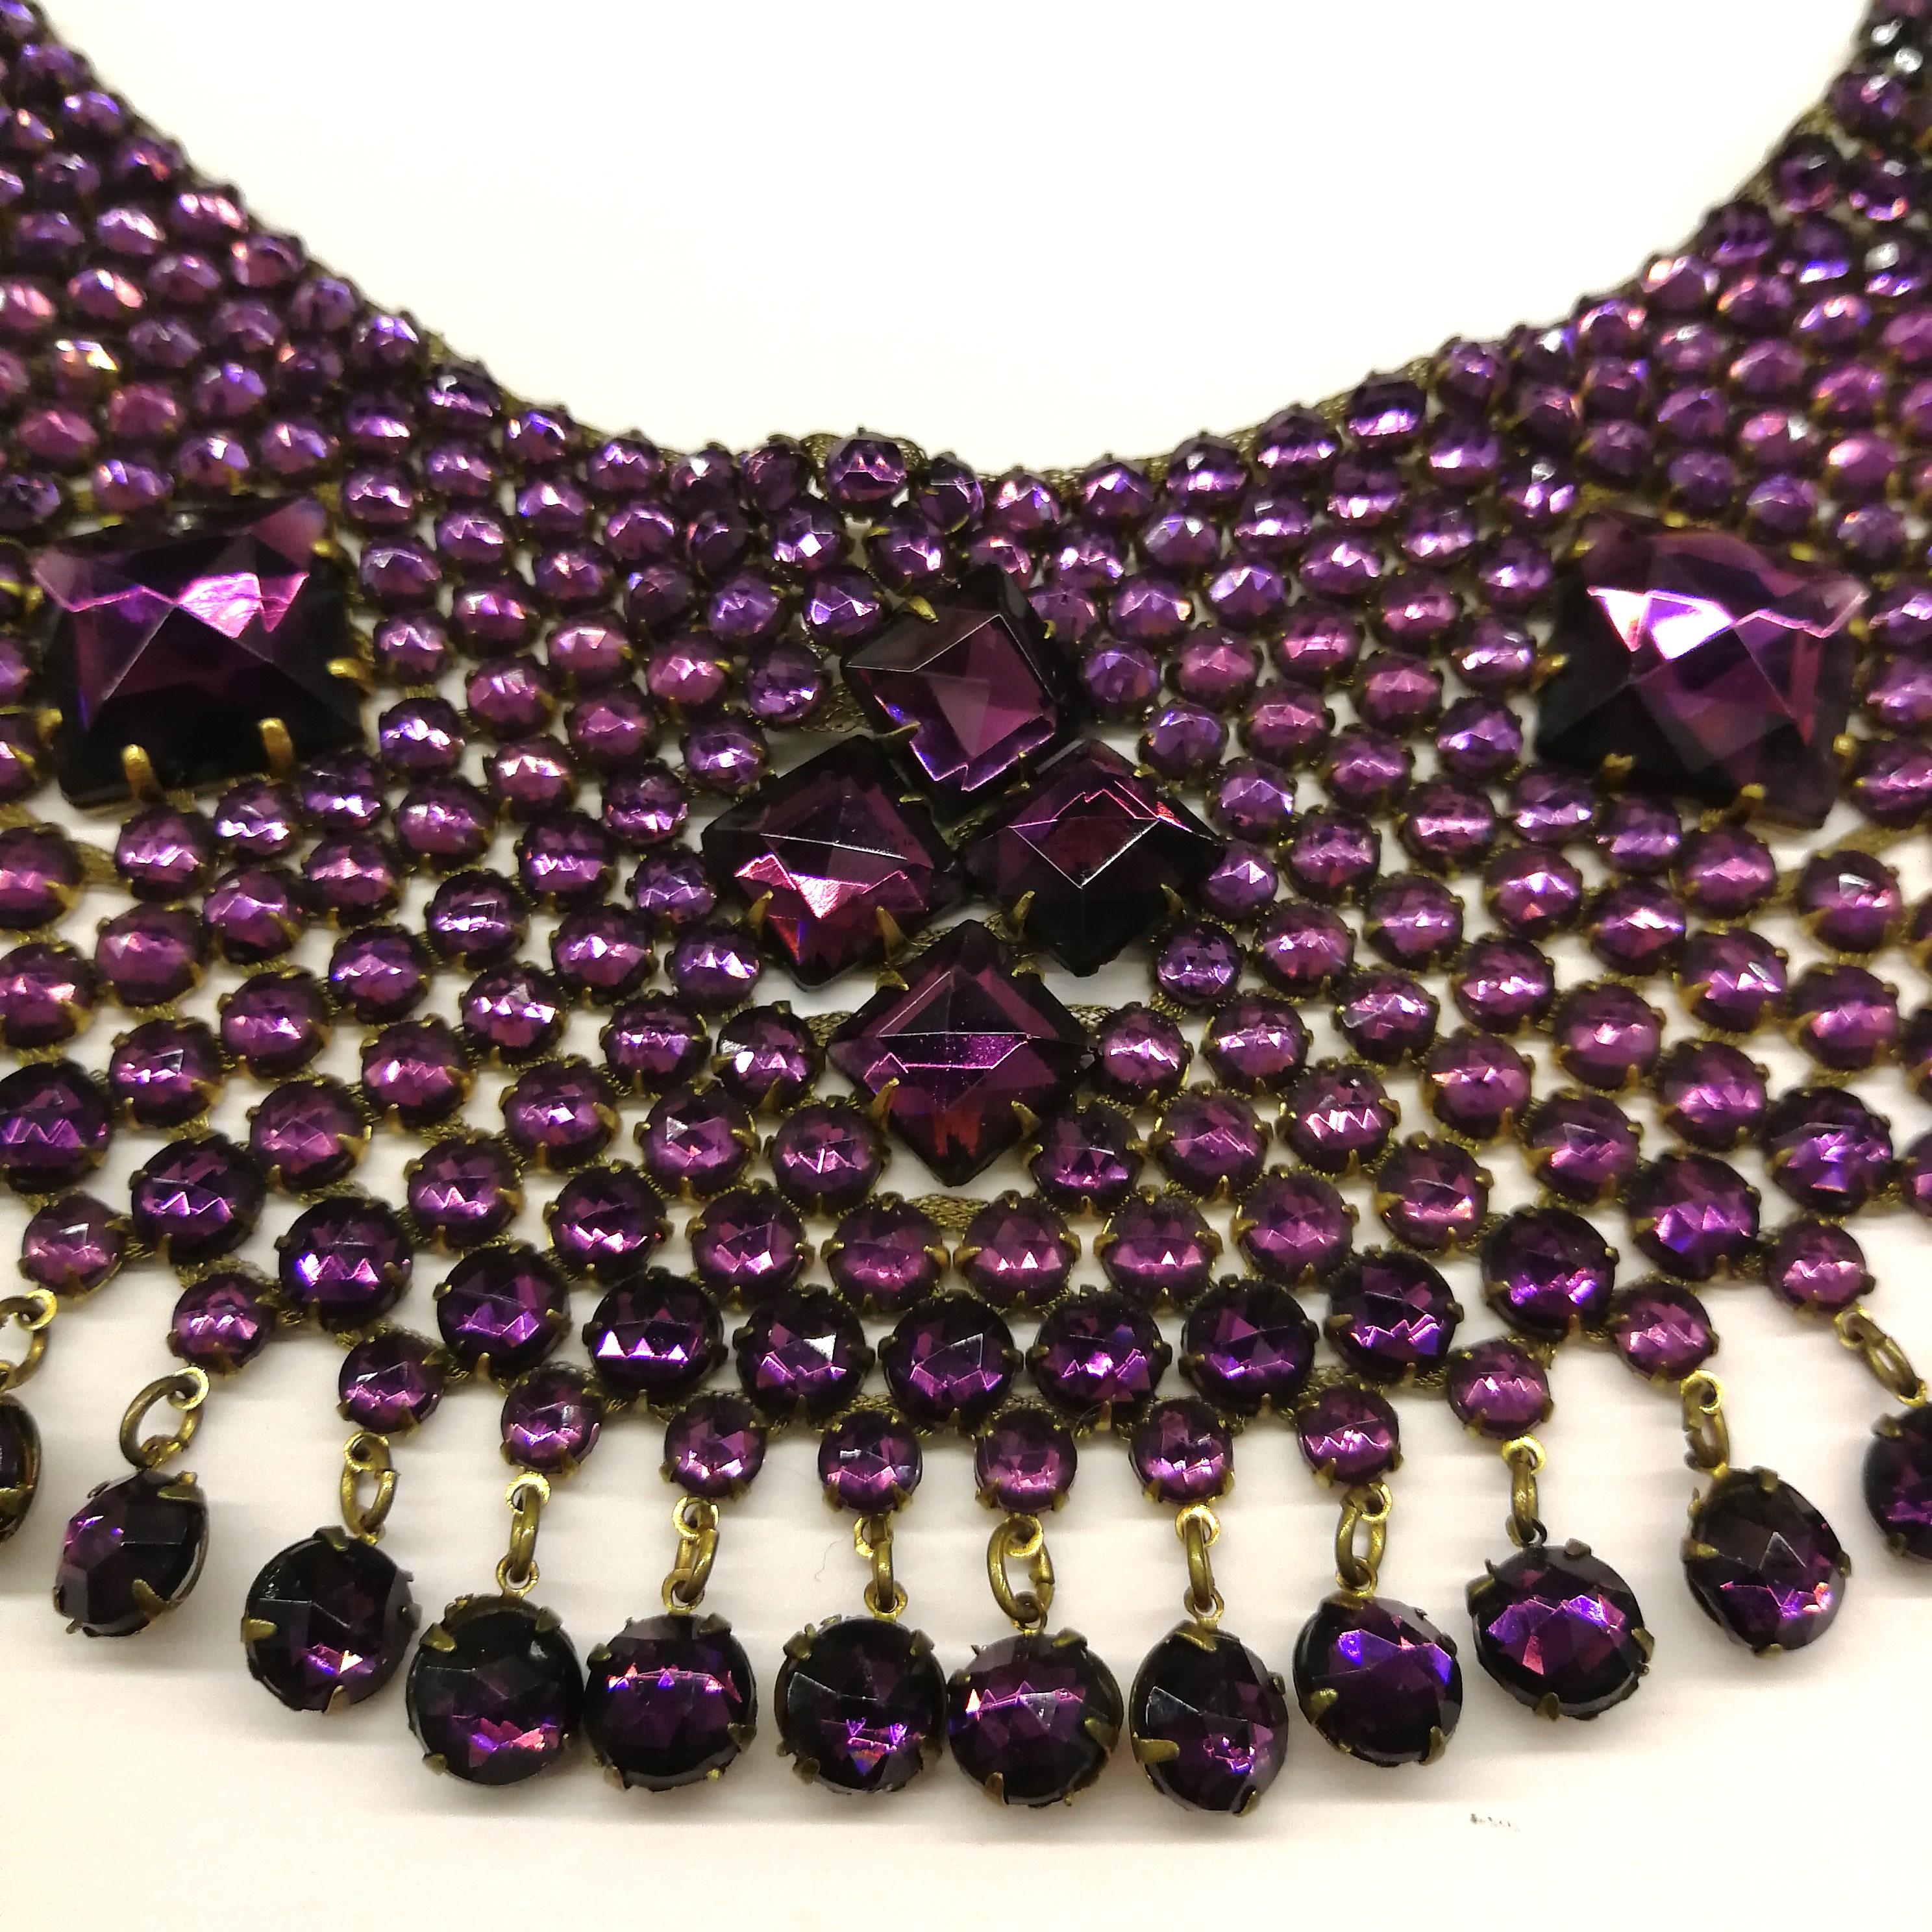 Vibrant purple cut glass 'bib' necklace, att. Lanvin, France, 1920s In Excellent Condition For Sale In Greyabbey, County Down